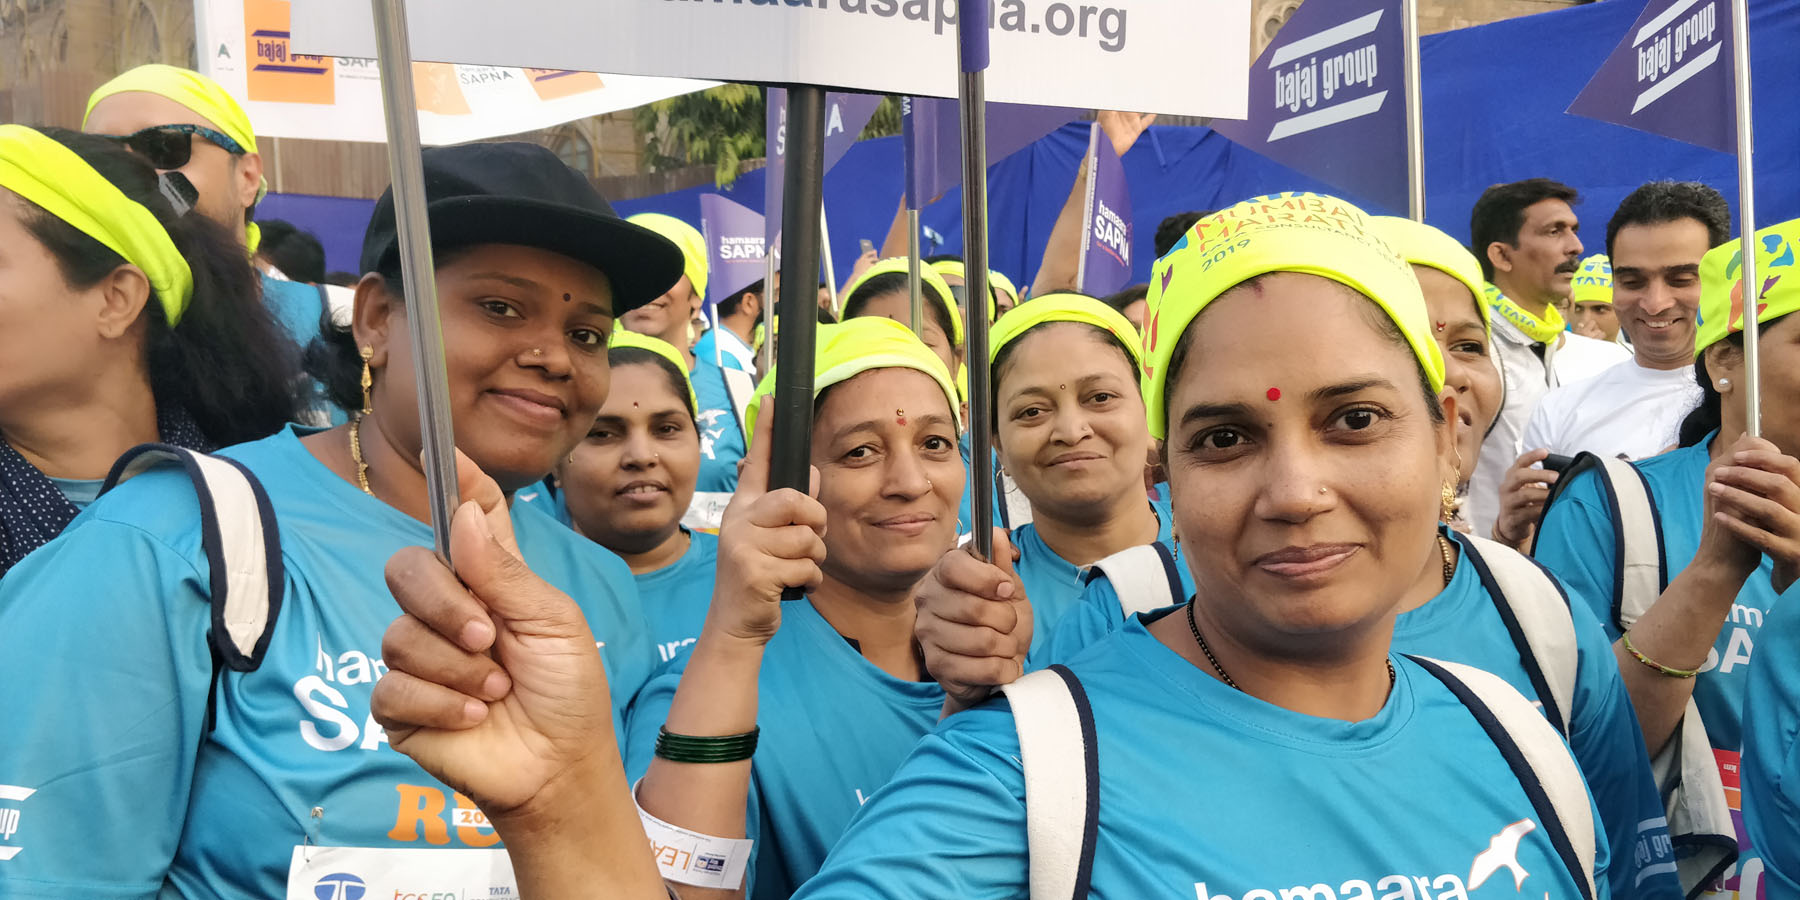 Dharavi Centre beneficiaries with staff of Dharavi Centre in the Marathon. They are proud to carry the placards and represent Hamaara Sapna